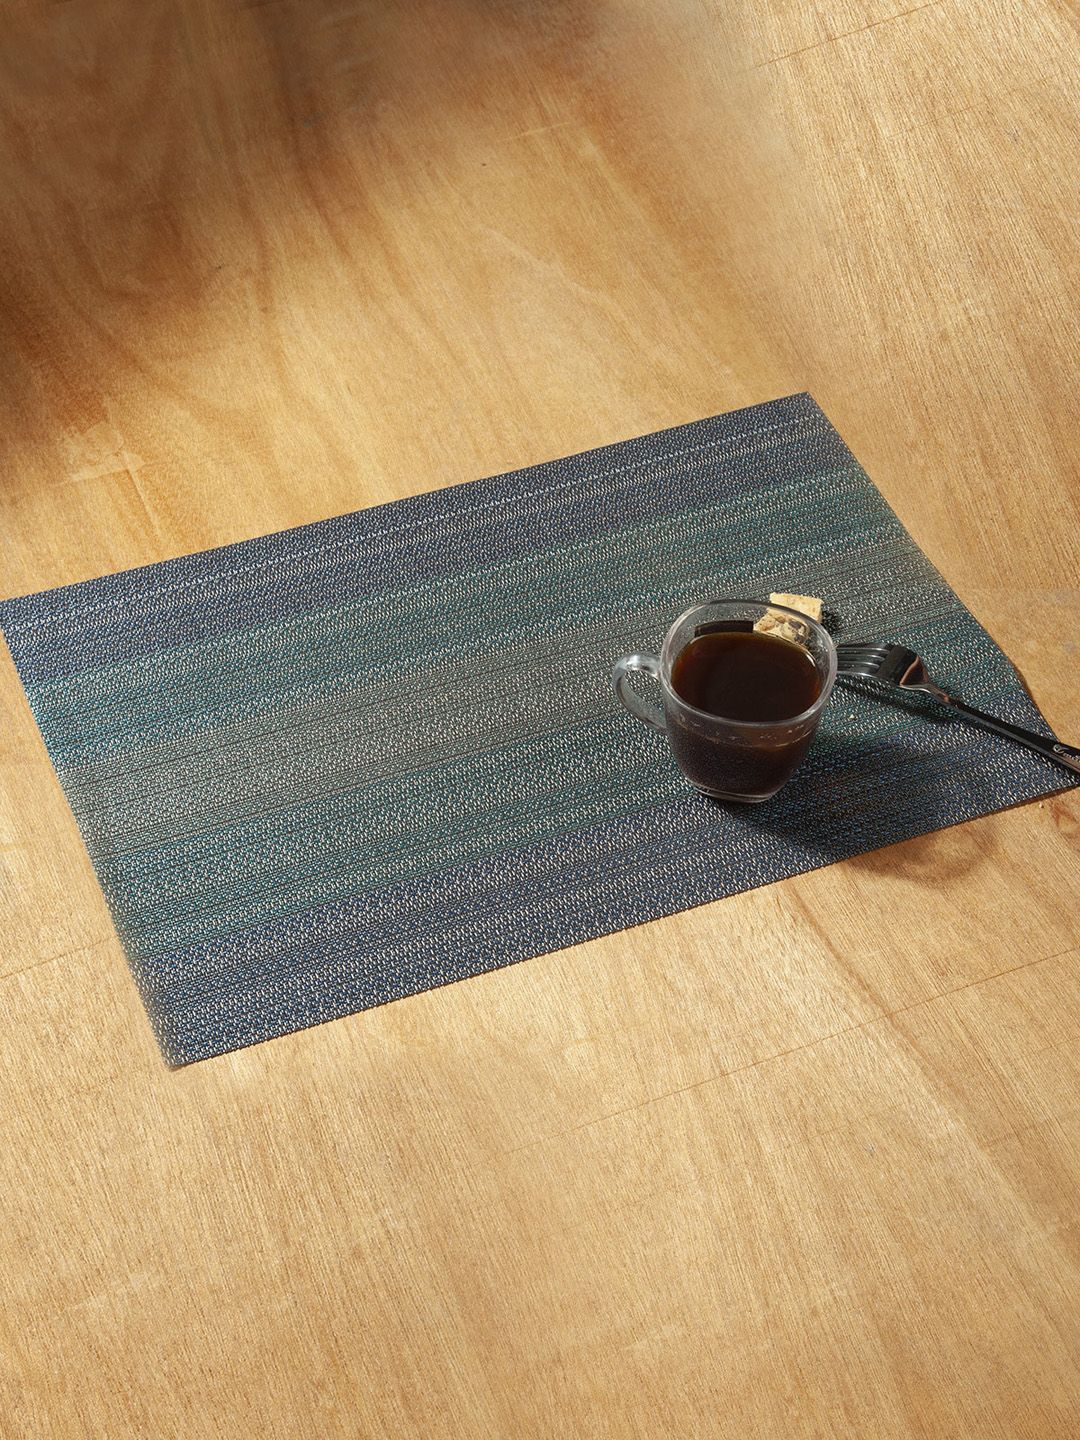 OBSESSIONS Set Of 6 Grey & Black Striped Table Mats Price in India